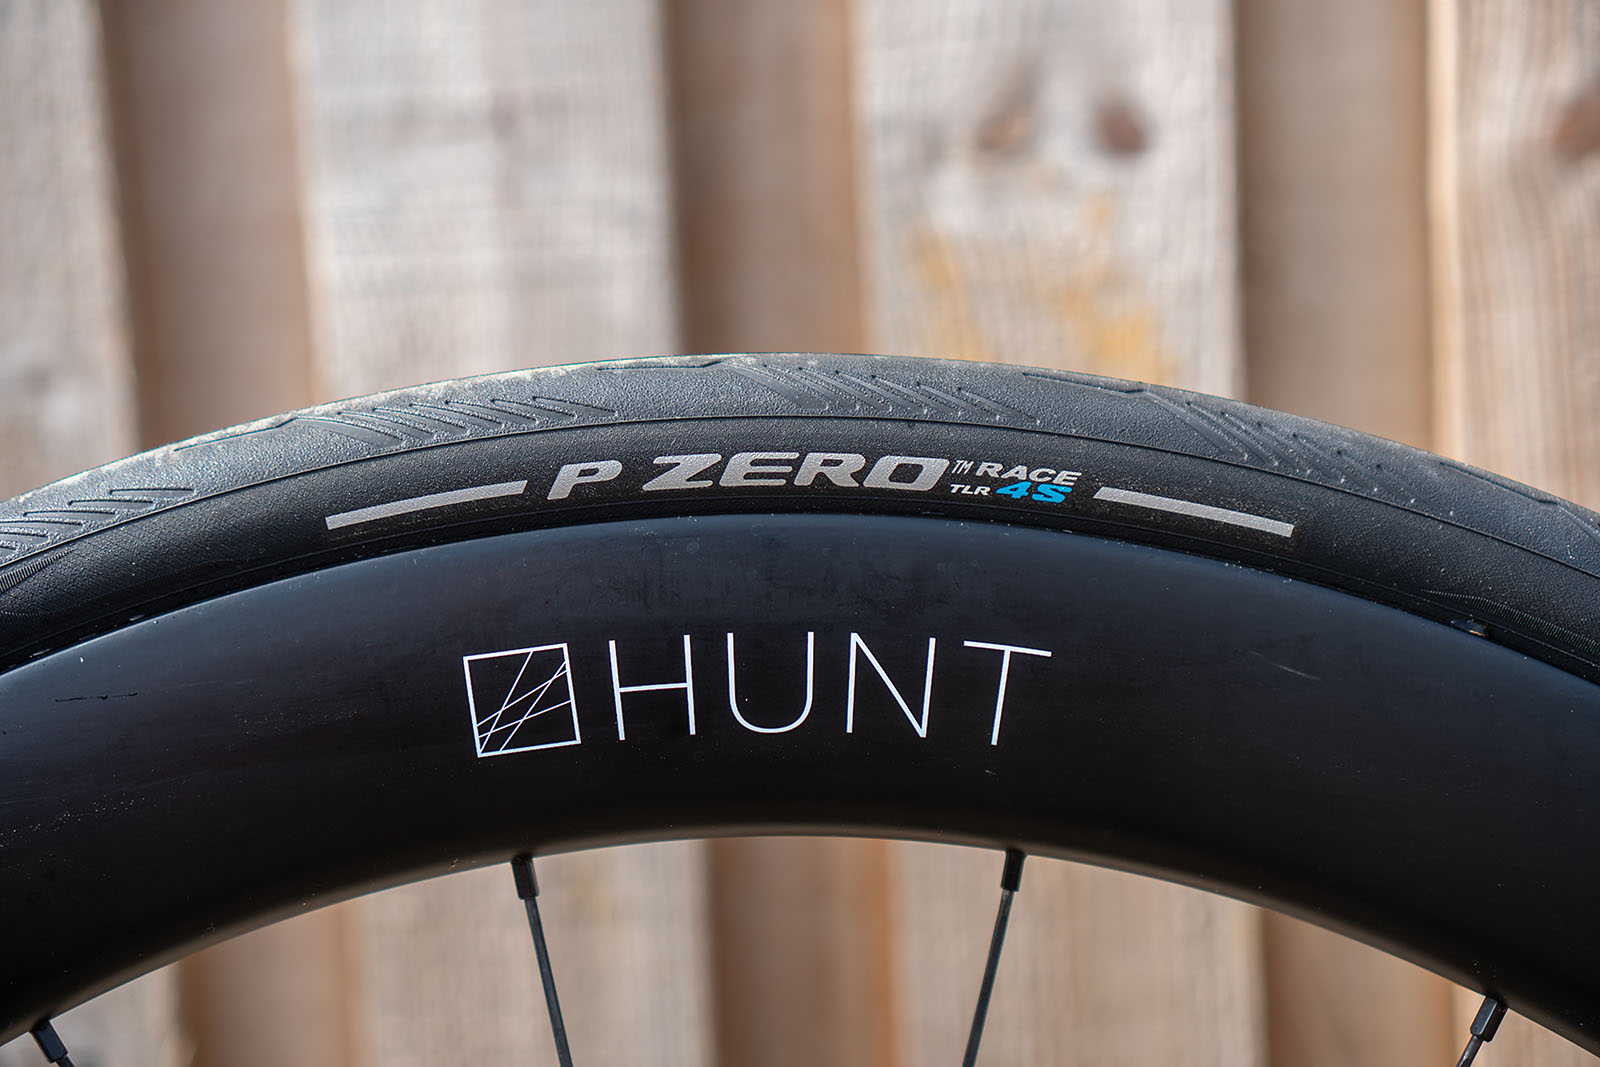 The best winter road bike 16 and training tyres for commuting | tyres